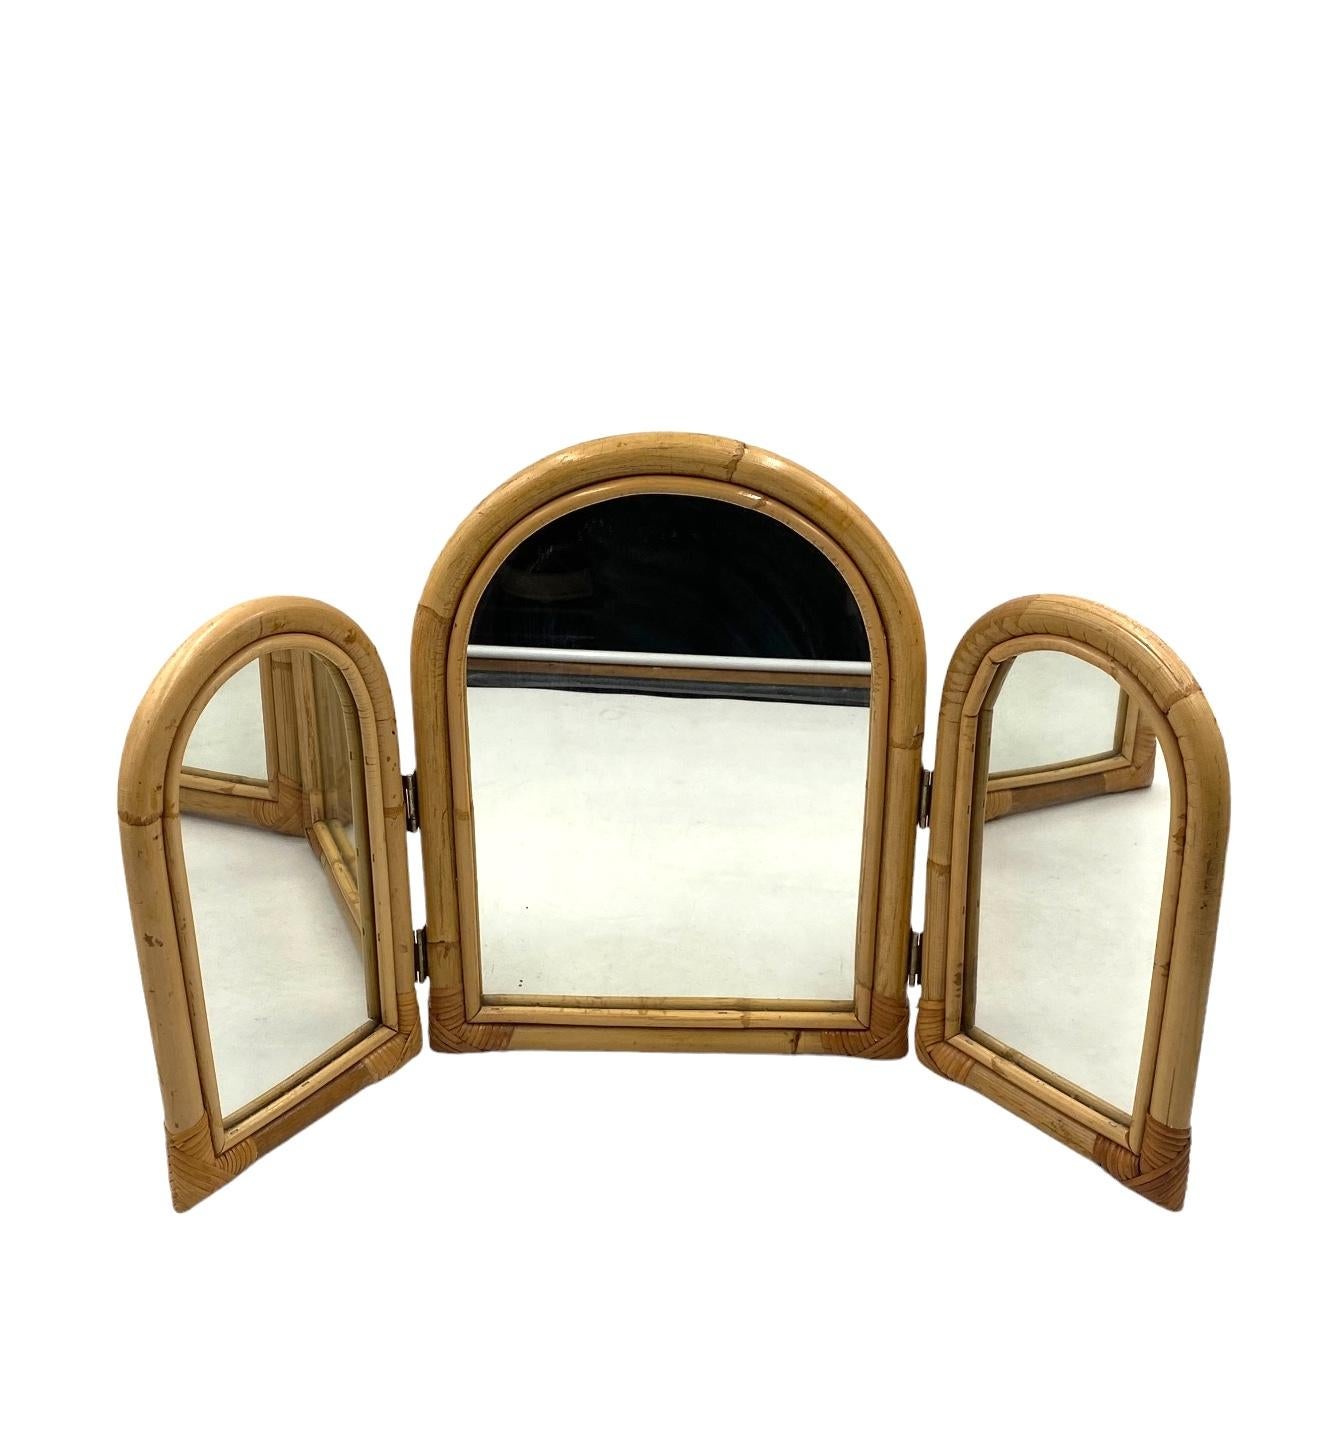 Bamboo three flaps table mirror / vanity, Italy 1960s For Sale 4